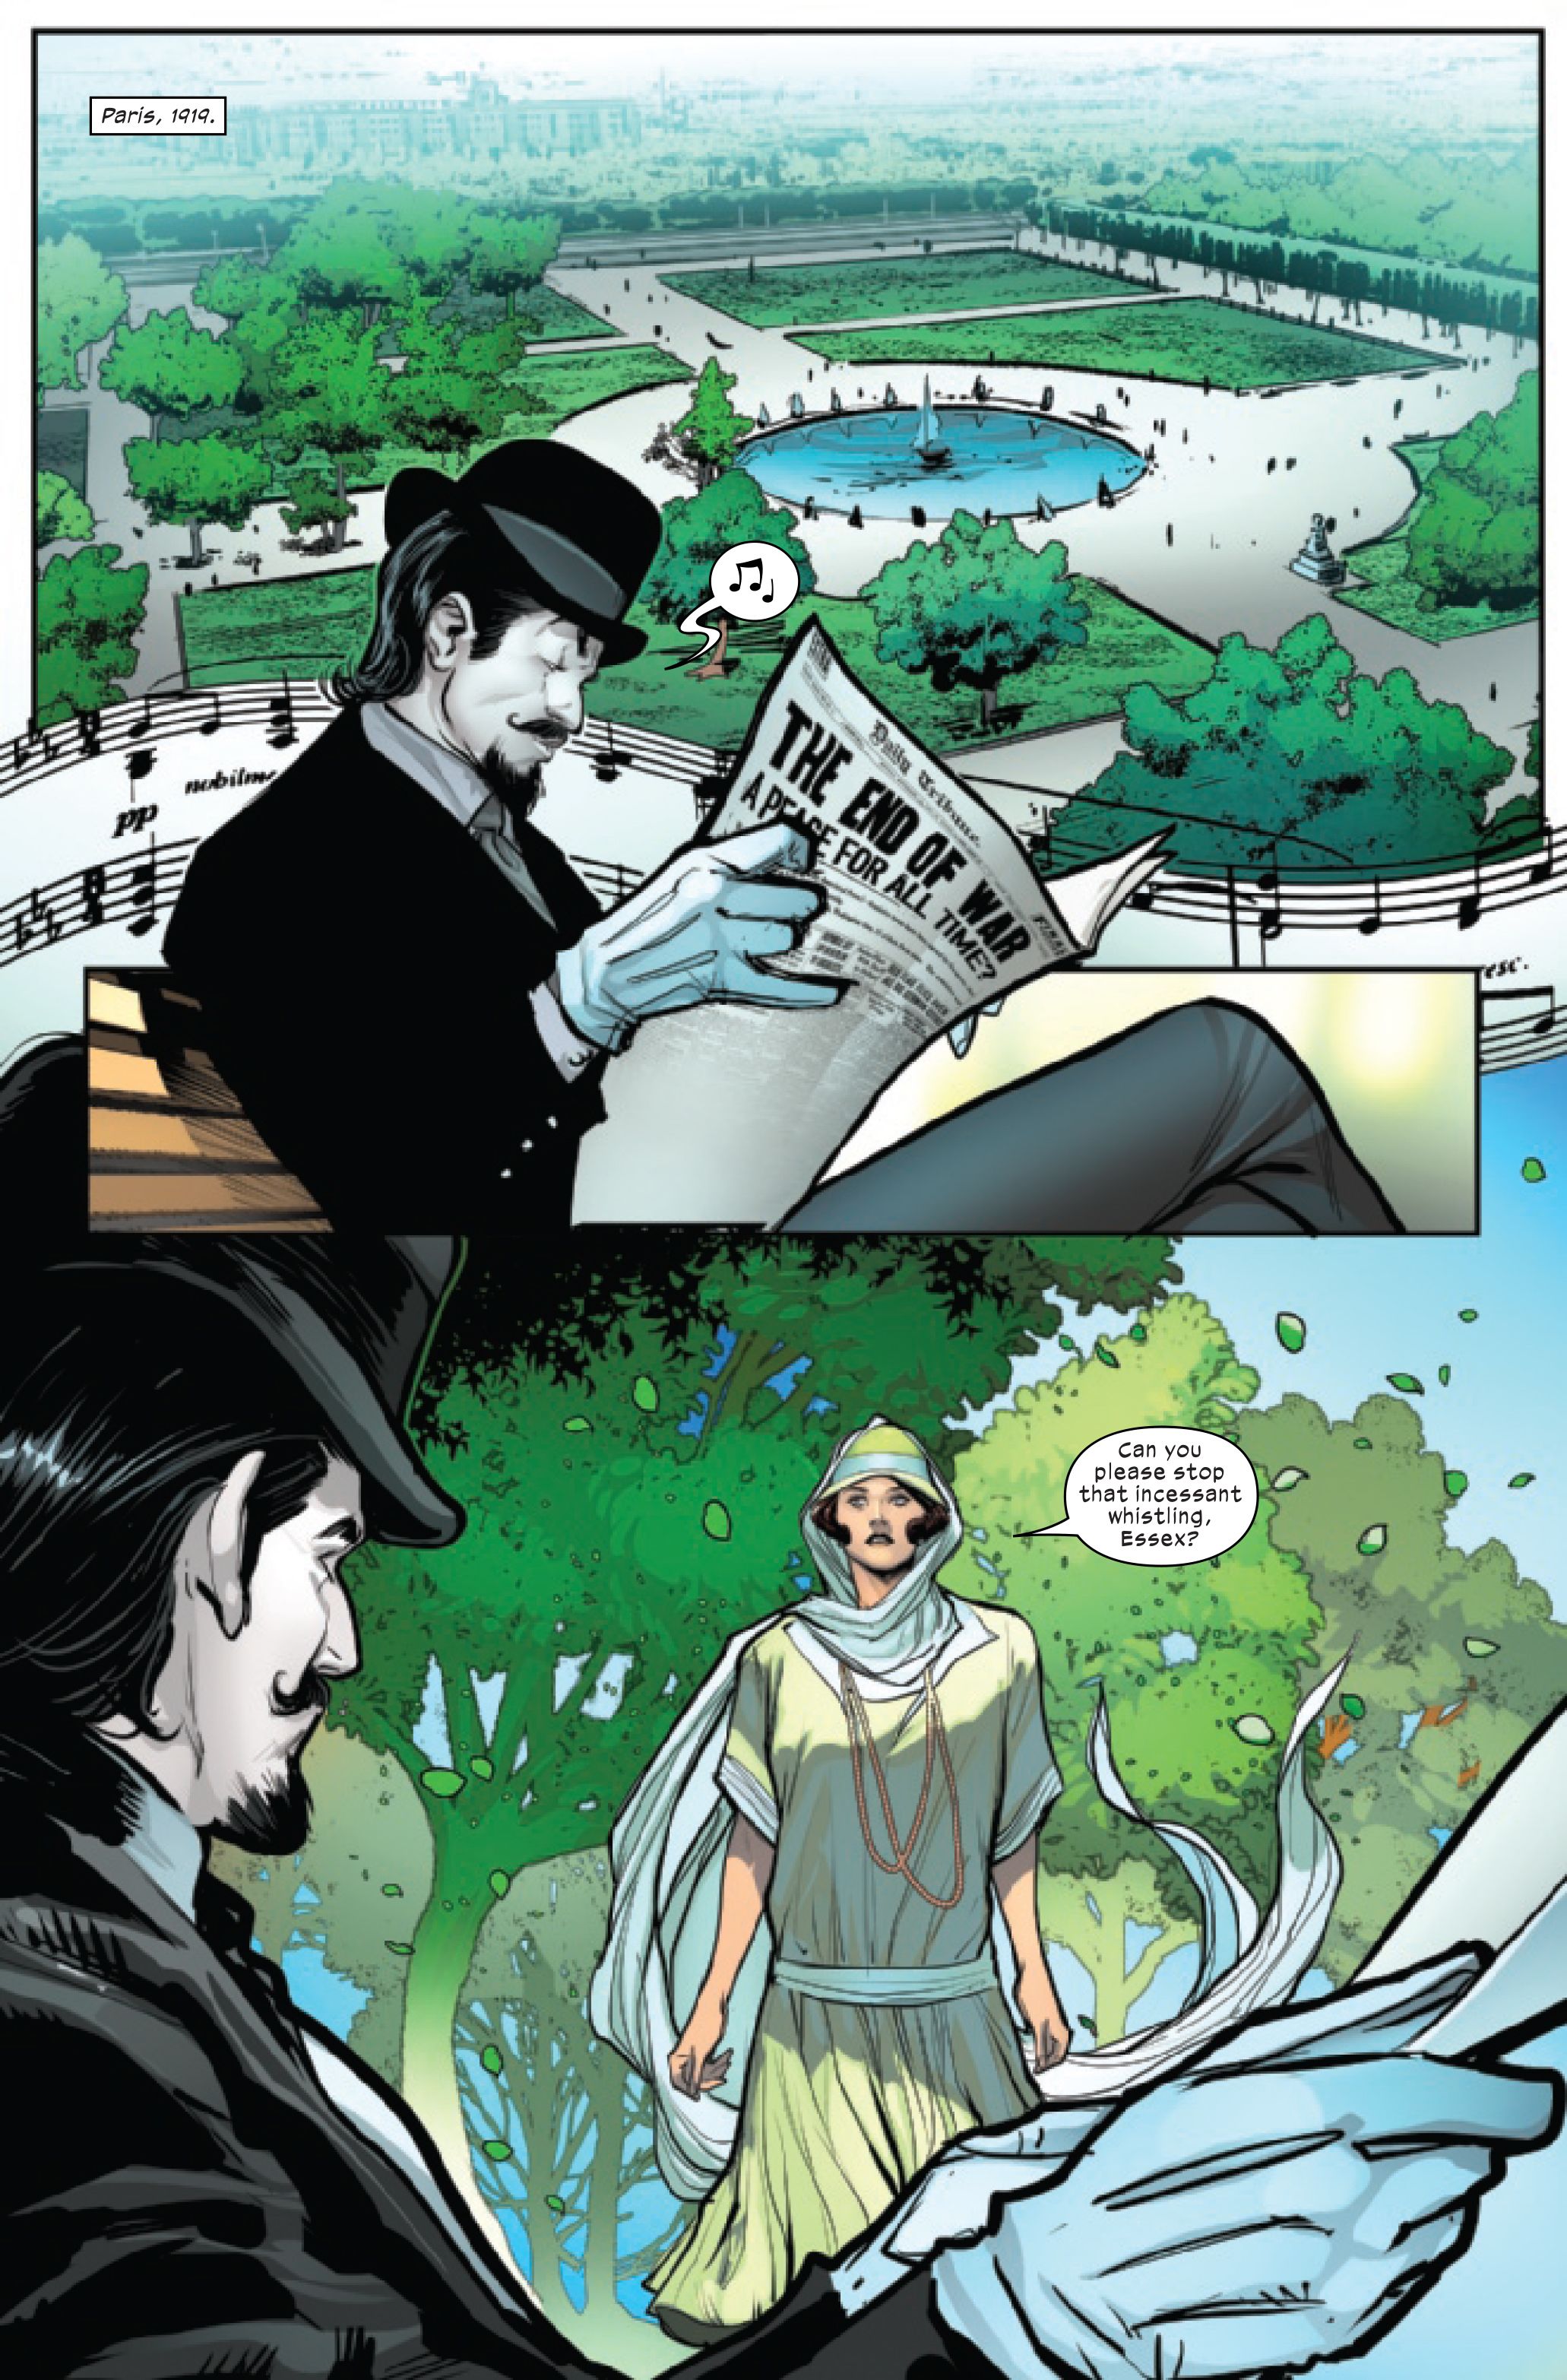 Mister Sinister and Irene Adler/Destiny talk in Immortal X-Men #1, by Kieron Gillen and Lucas Werneck. (Page 1)